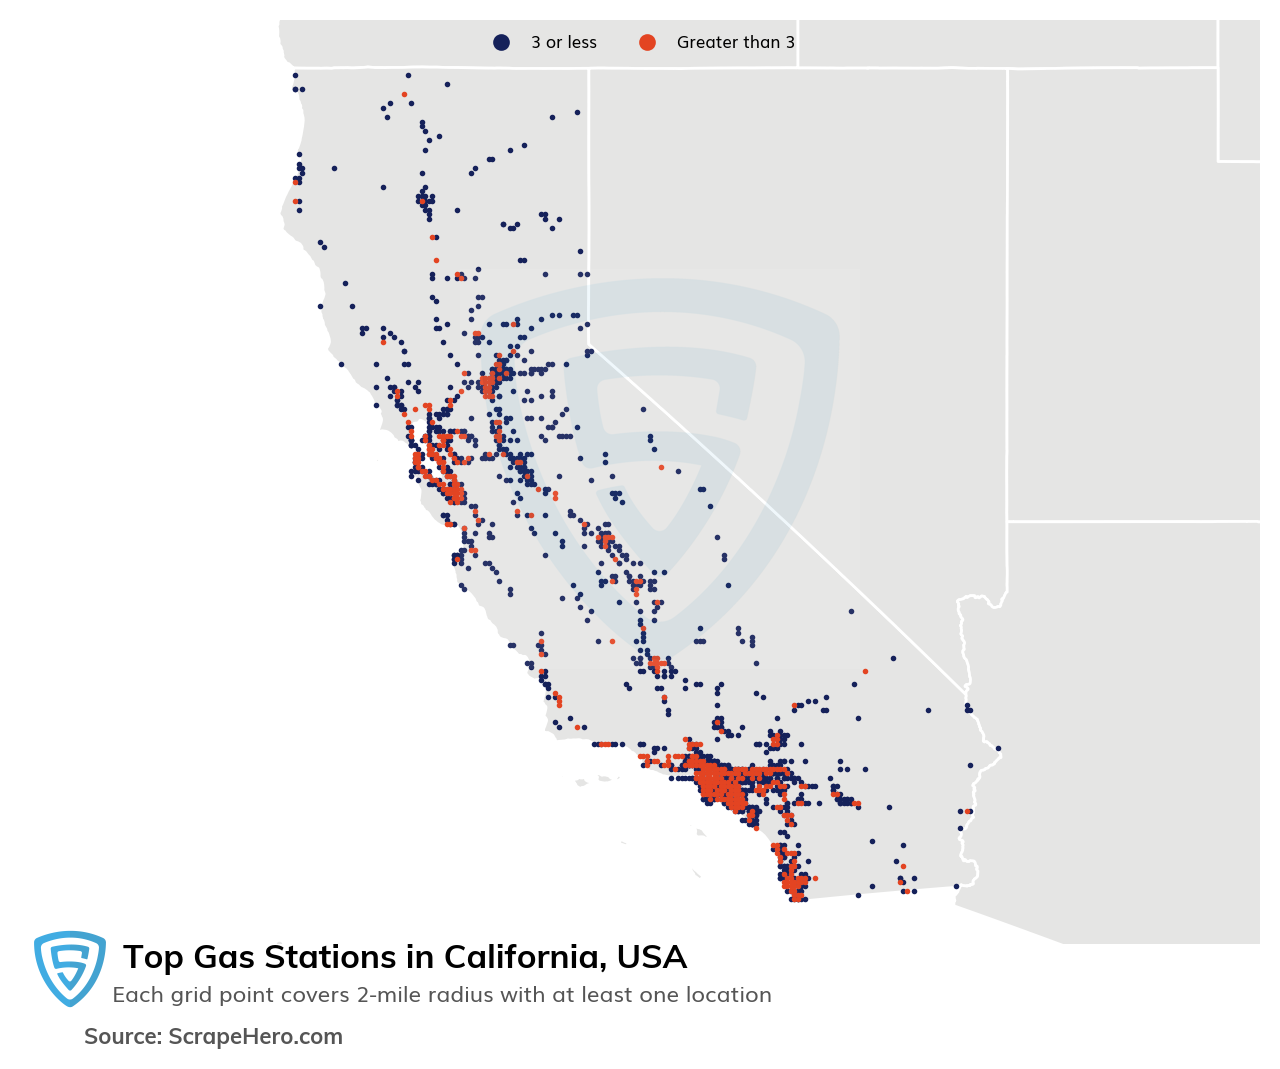 Largest gas stations in Based on Locations | ScrapeHero